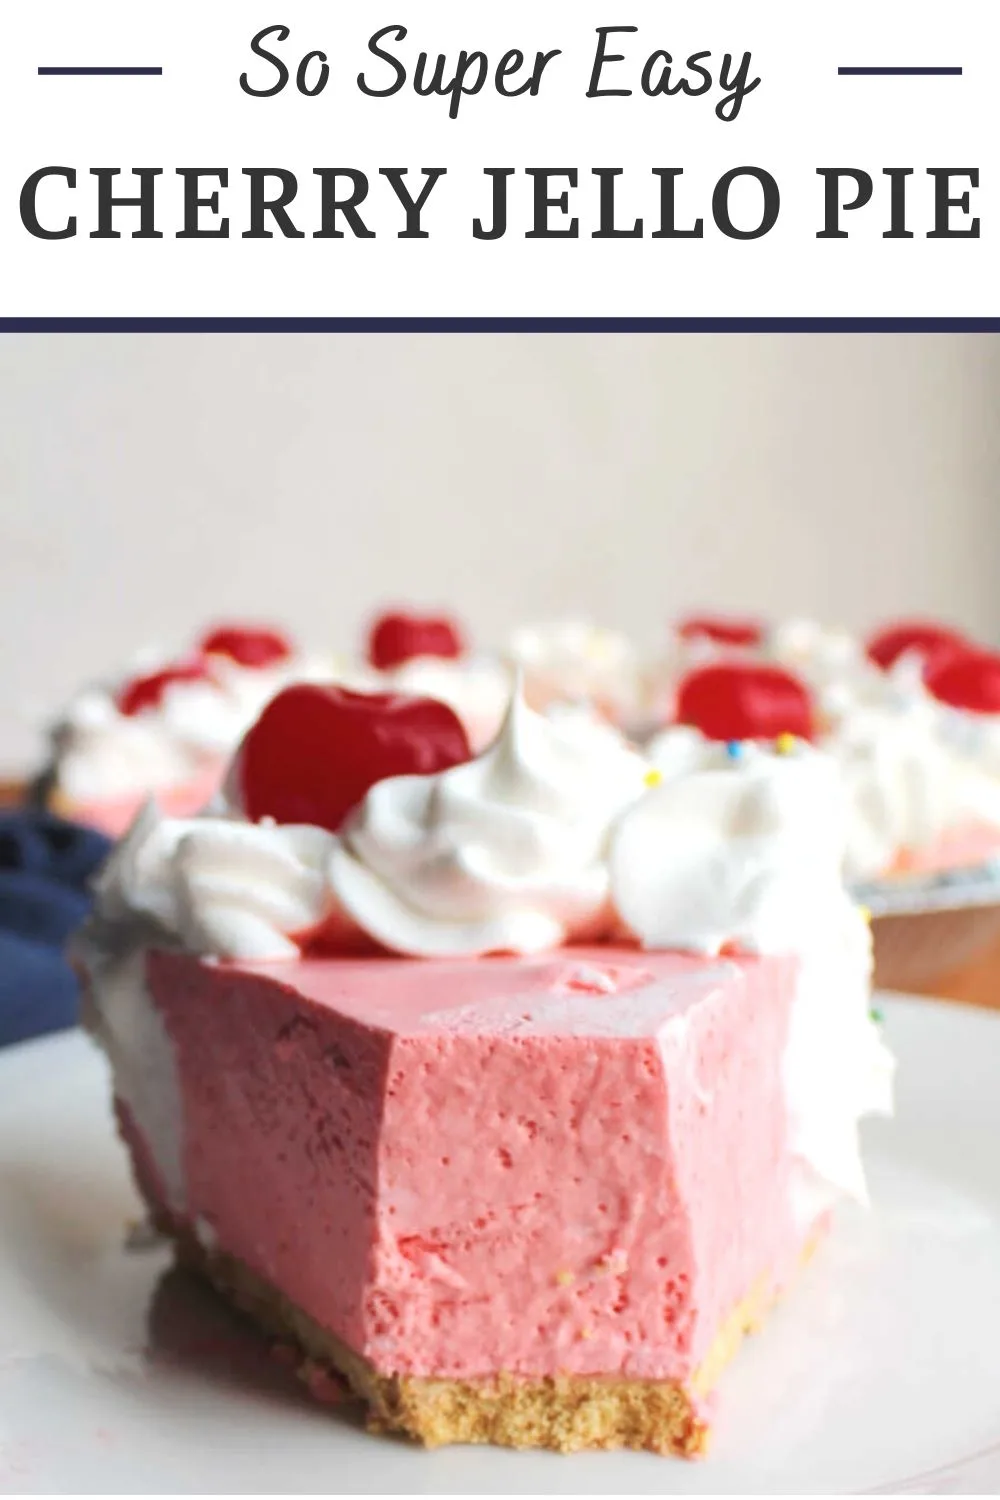 Treats really don't get much easier than this no bake 3 ingredient Jello pie. It only takes a few minutes to put together and it is airy, creamy and refreshing.